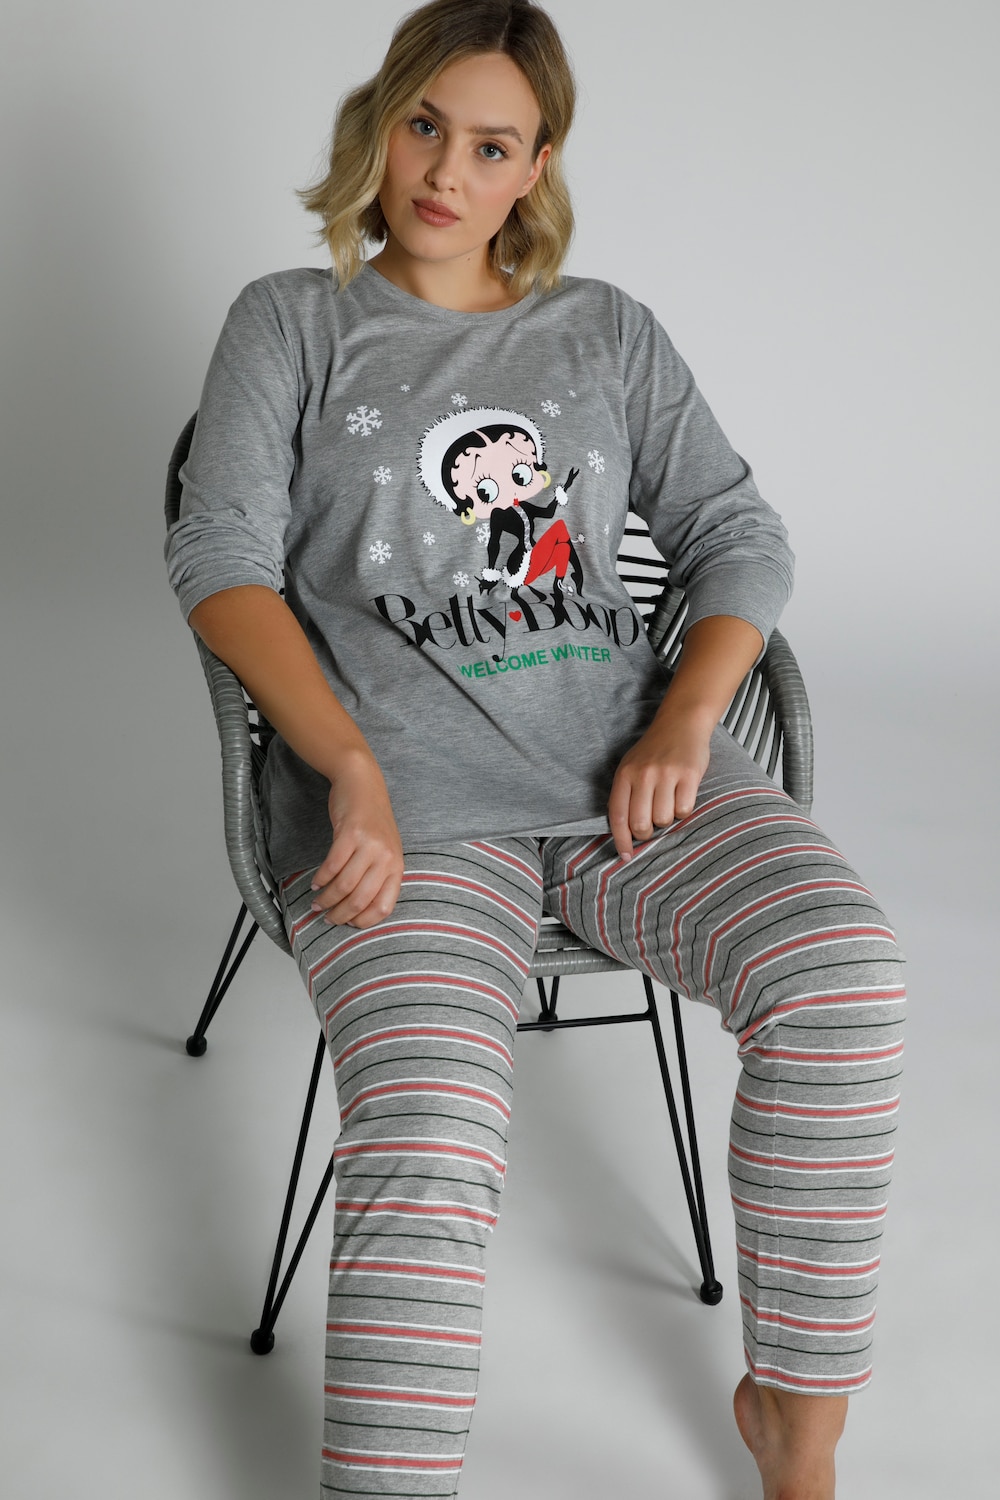 Plus Size WELCOME WINTER Betty Boop Pajama Top, Woman, grey, size: 16/18, cotton/polyester, Ulla Popken